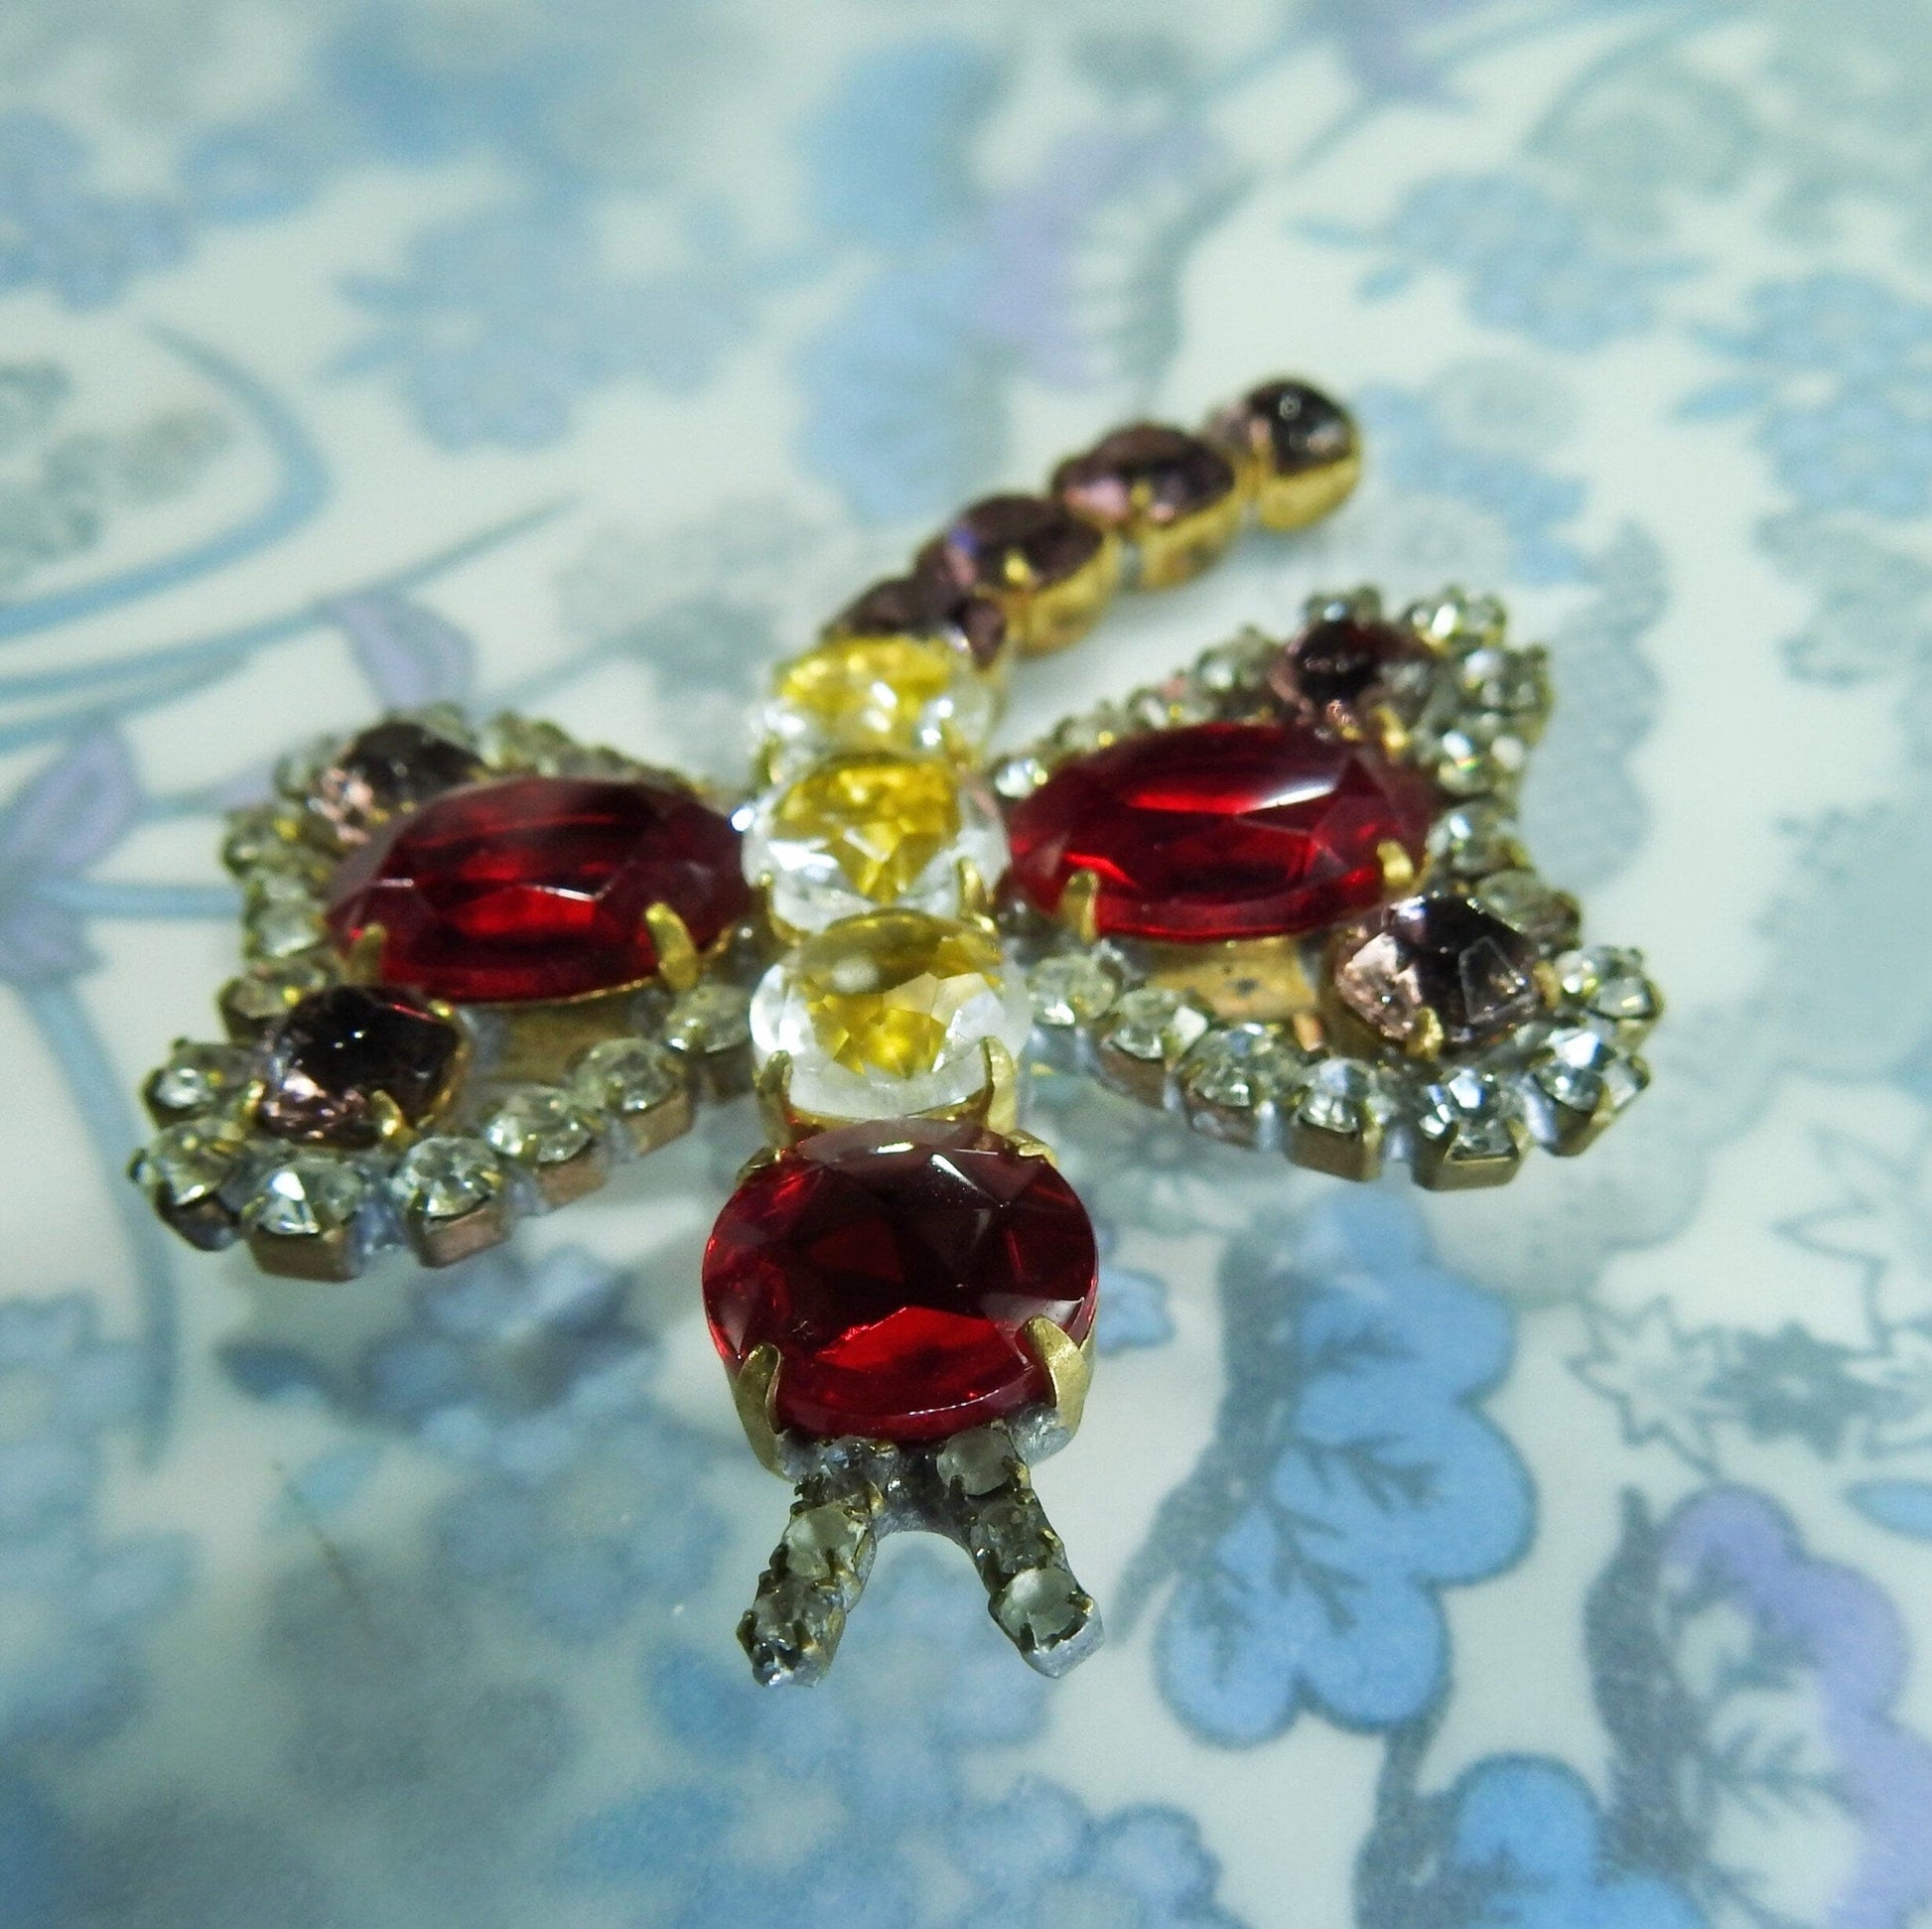 Exquisite Czech Glass Dragonfly Brooch: Luminous Rhinestones. Elegance for Fashionable Women. 50x40mm, Silver & Gold Tones. Gift for her.